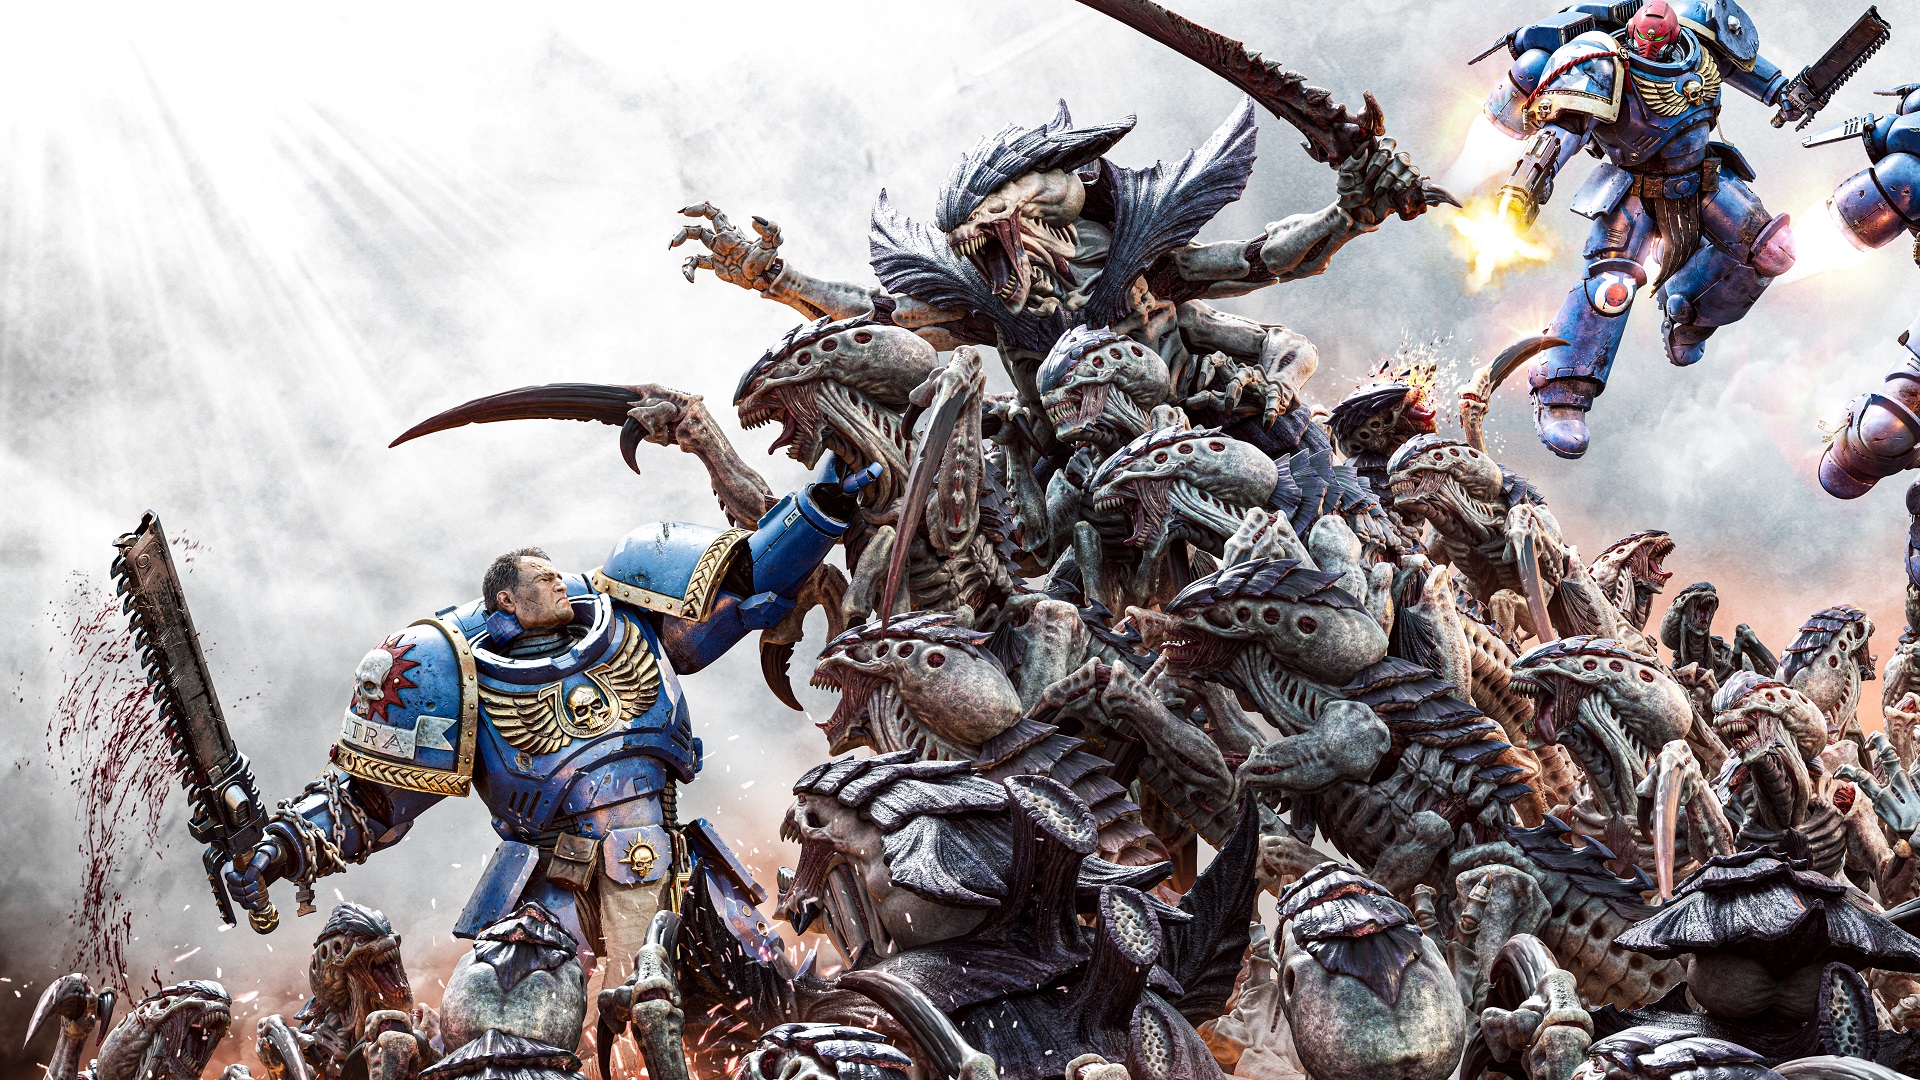 Warhammer 40k Space Marine 2 release date, story, trailers, and more